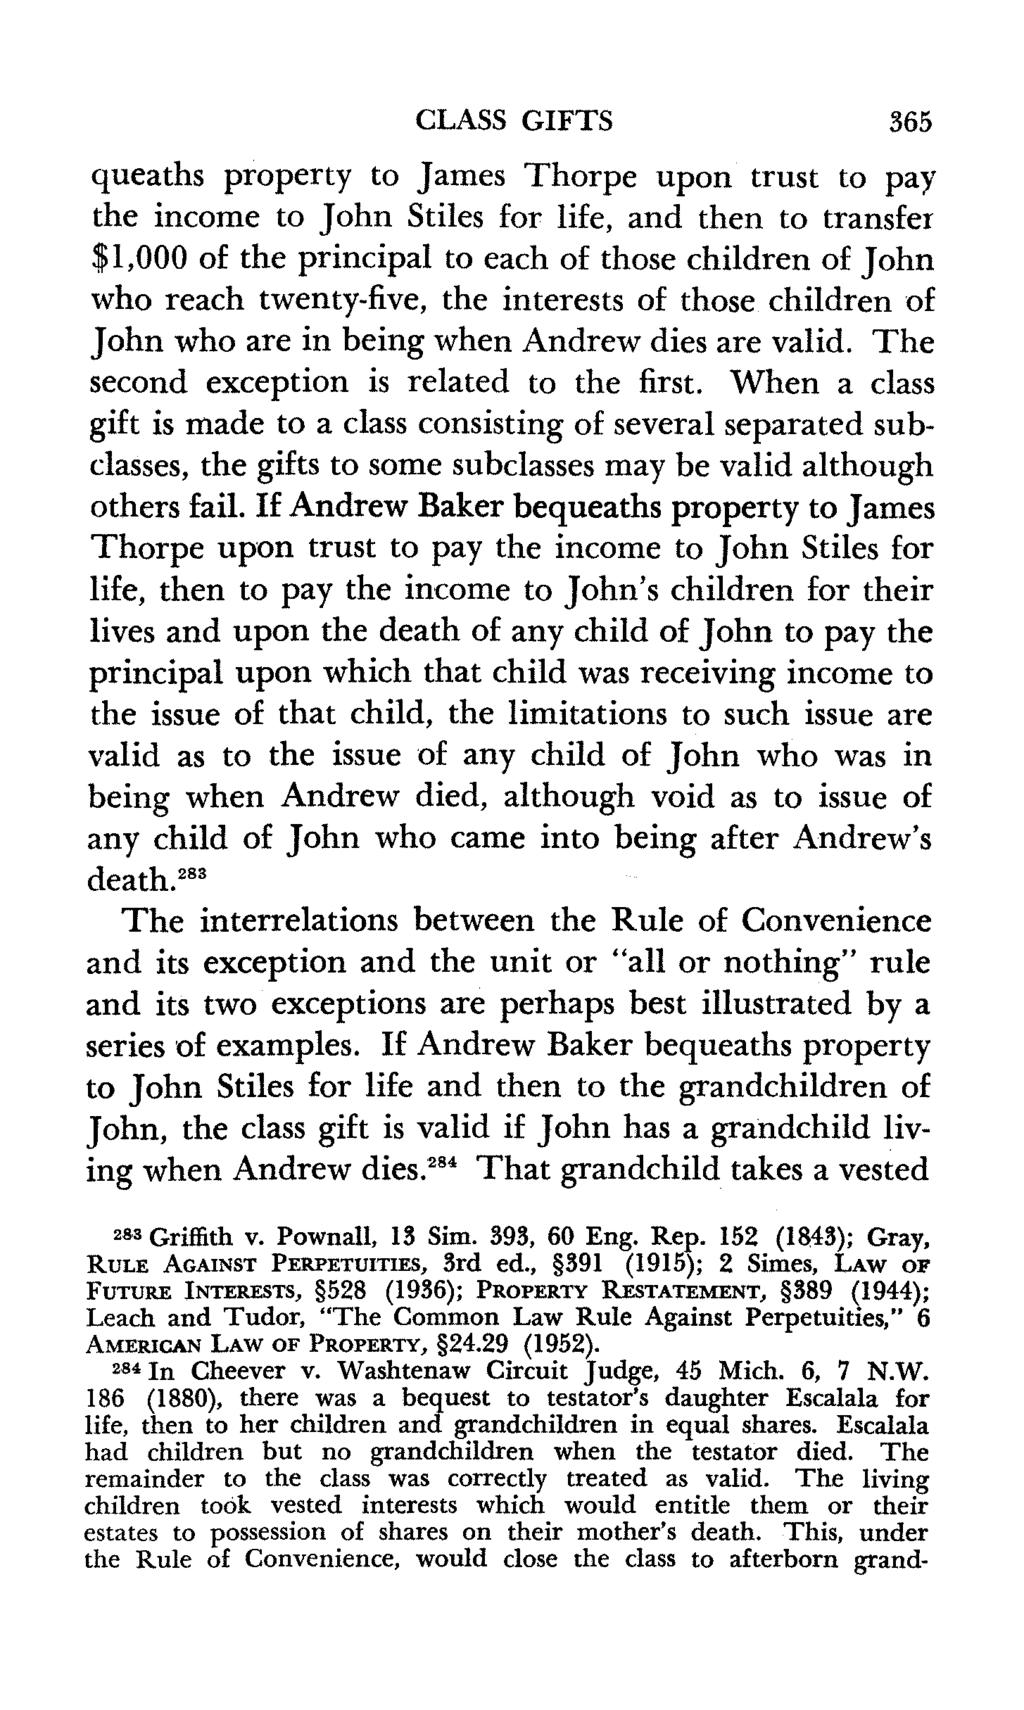 CLASS GIFTS 365 queaths property to James Thorpe upon trust to pay the income to John Stiles for life, and then to transfer $1,000 of the principal to each of those children of John who reach